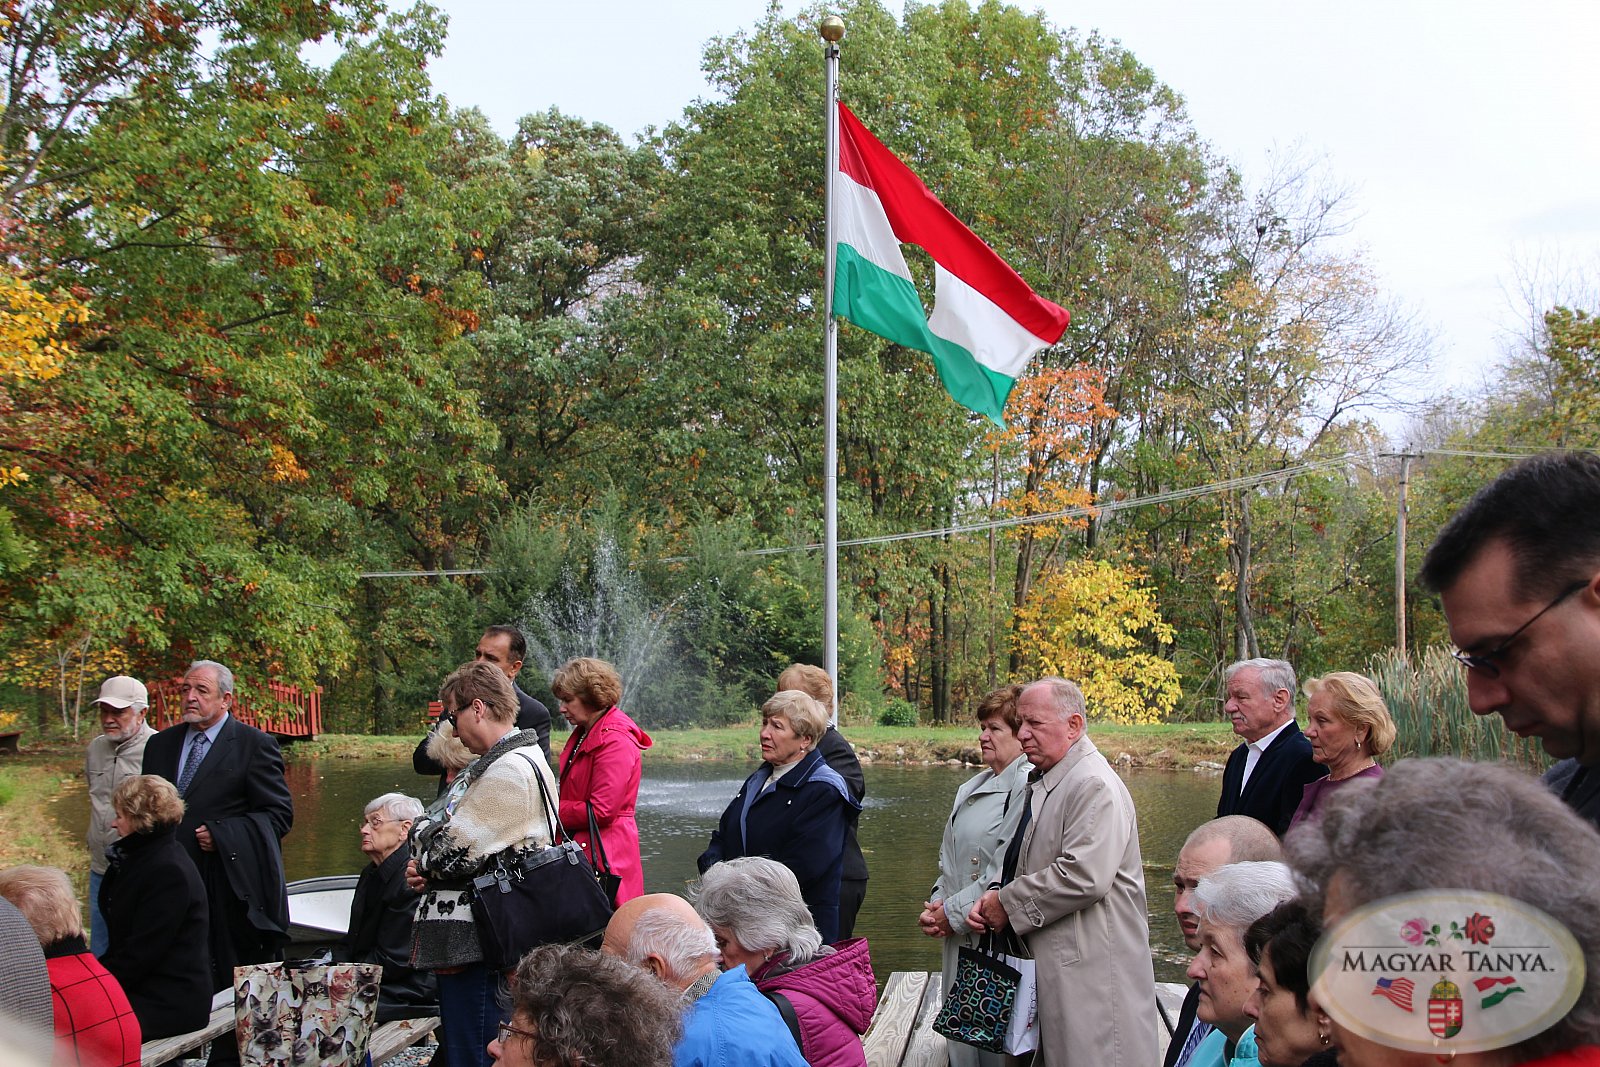 60th Anniversary of the Hungarian Revolution of 1956